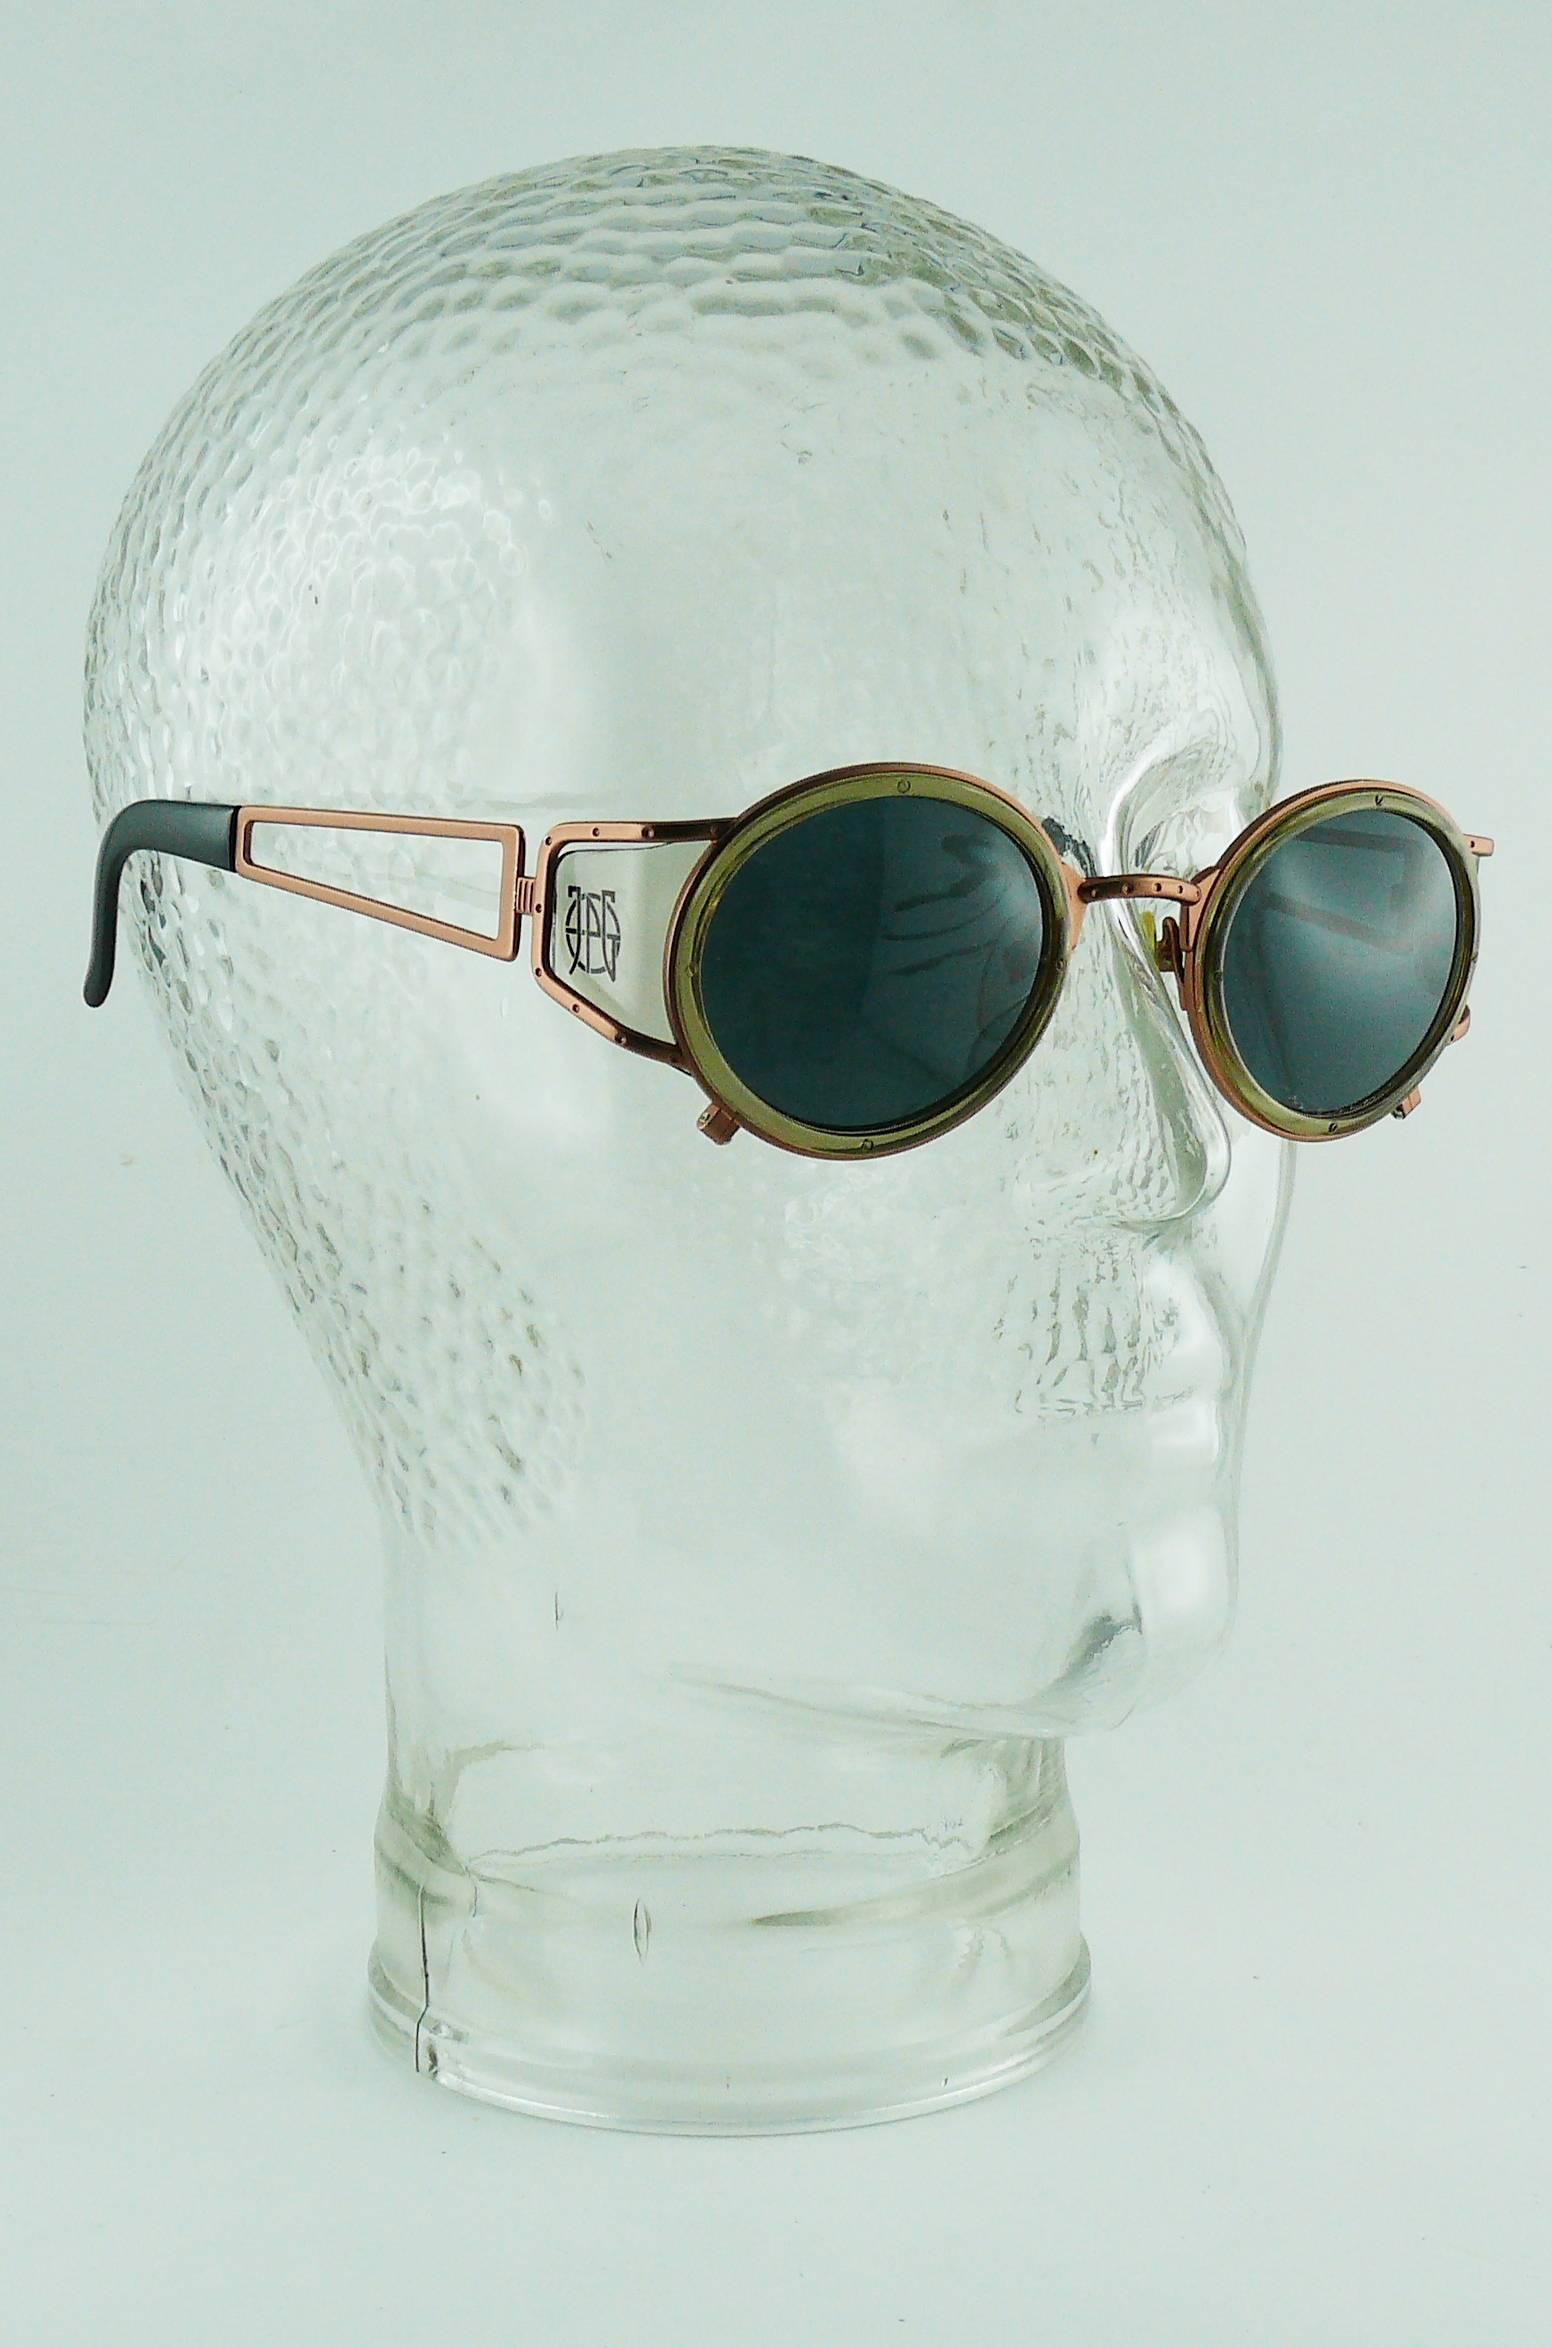 JEAN PAUL GAULTIER vintage steampunk sunglasses with side shields.

Copper toned frame featuring clear plastic side shields with JPG logo.
Tinted lenses.

Indicative measurements : max. width approx. 13.2 cm (5.20 inches) / width between lenses